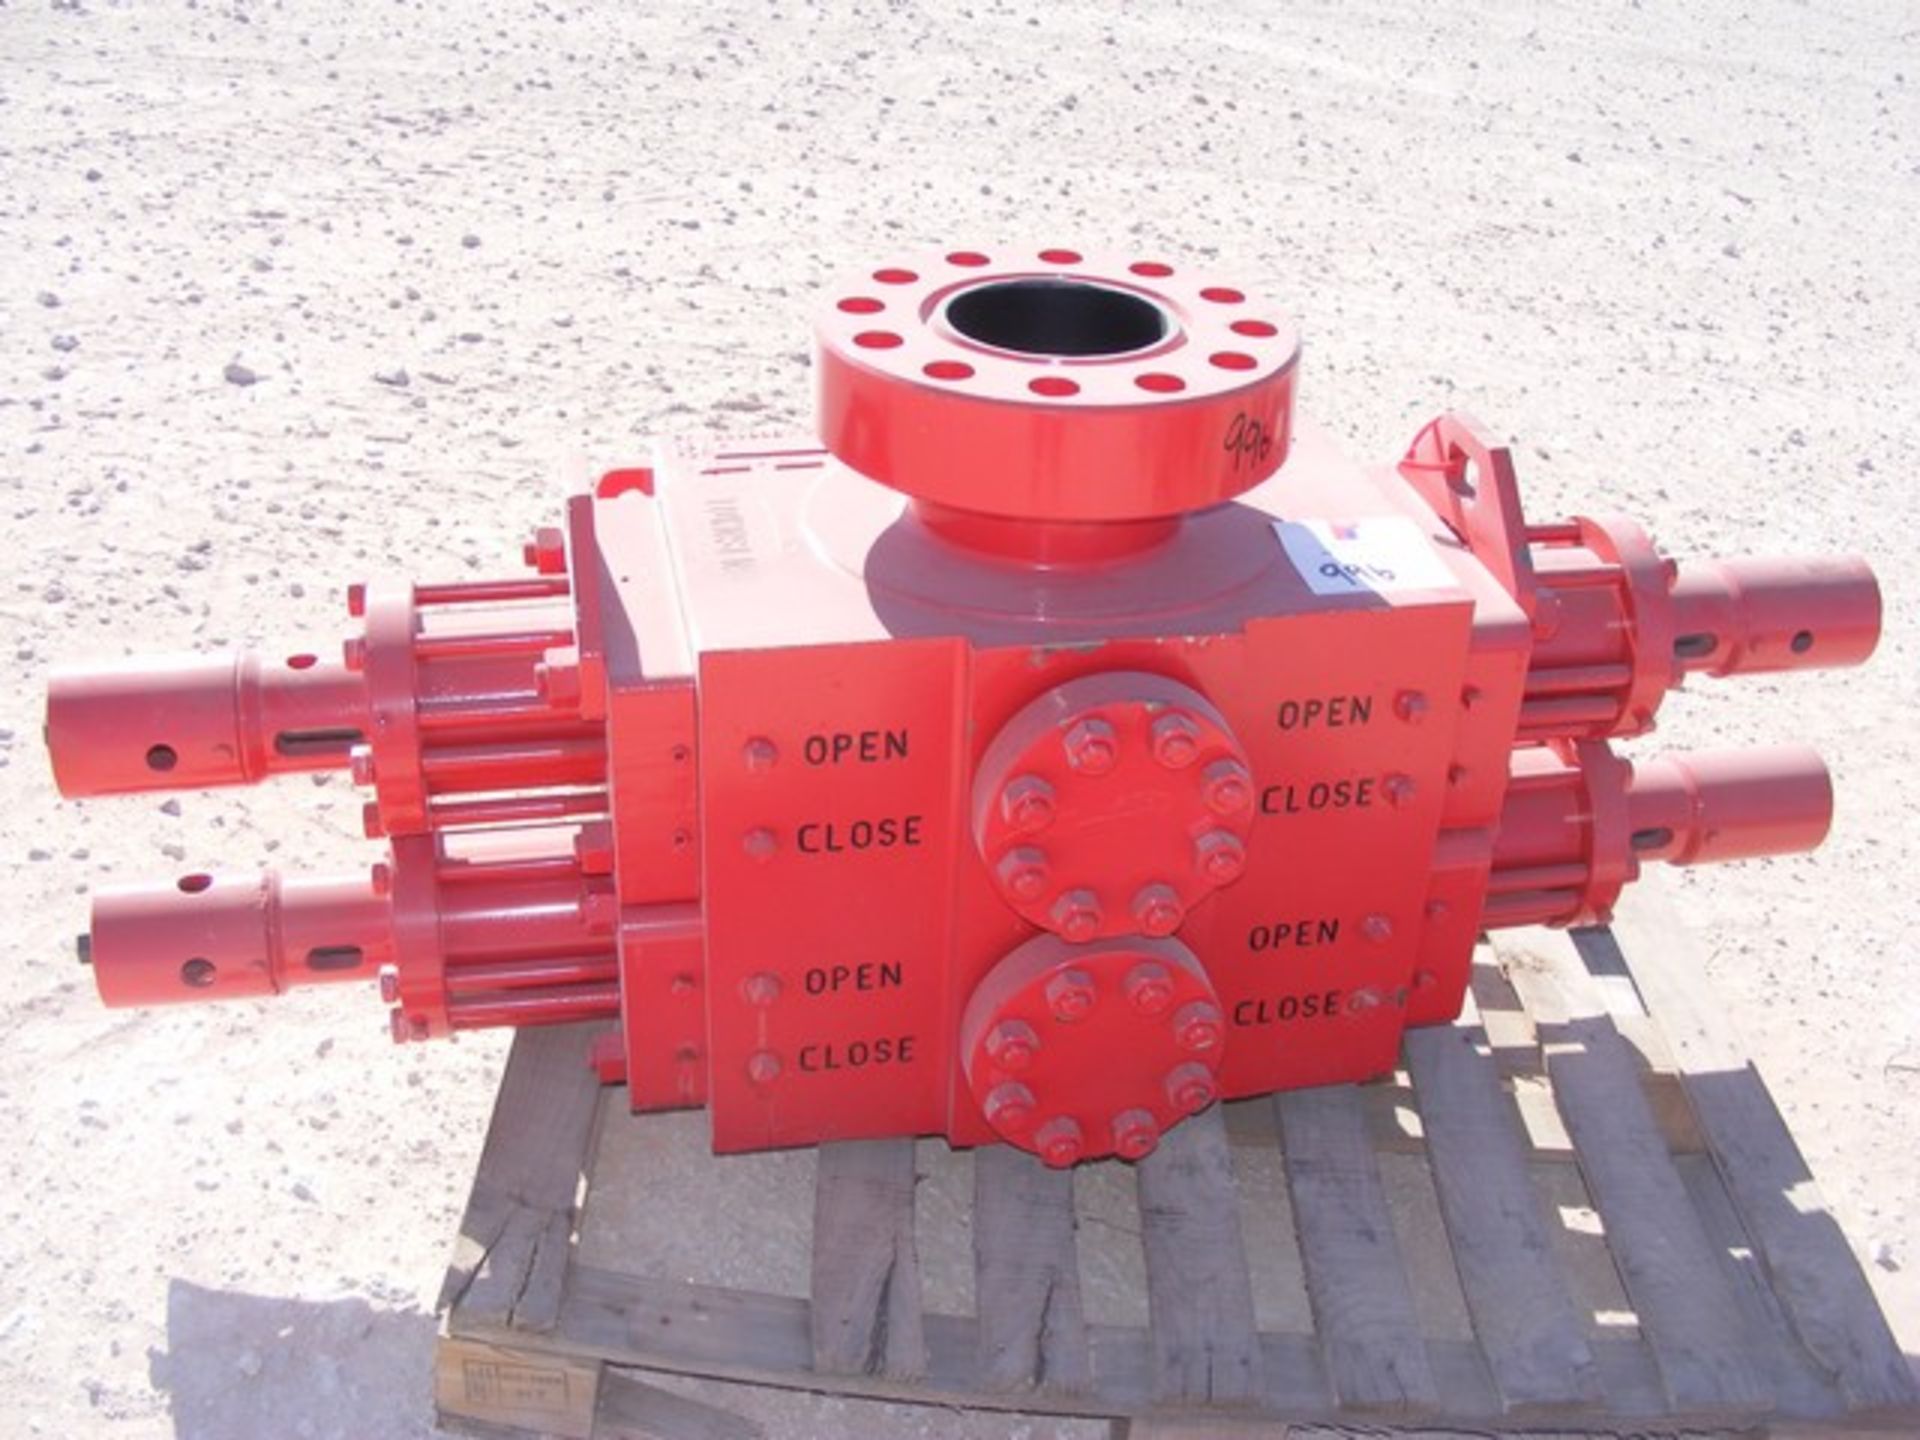 Located in YARD 1 - Midland, TX TOWNSEND 7-1/16", 5K DBL HYD BOP W/ (2) OUTLETS, FLANGED TOP,